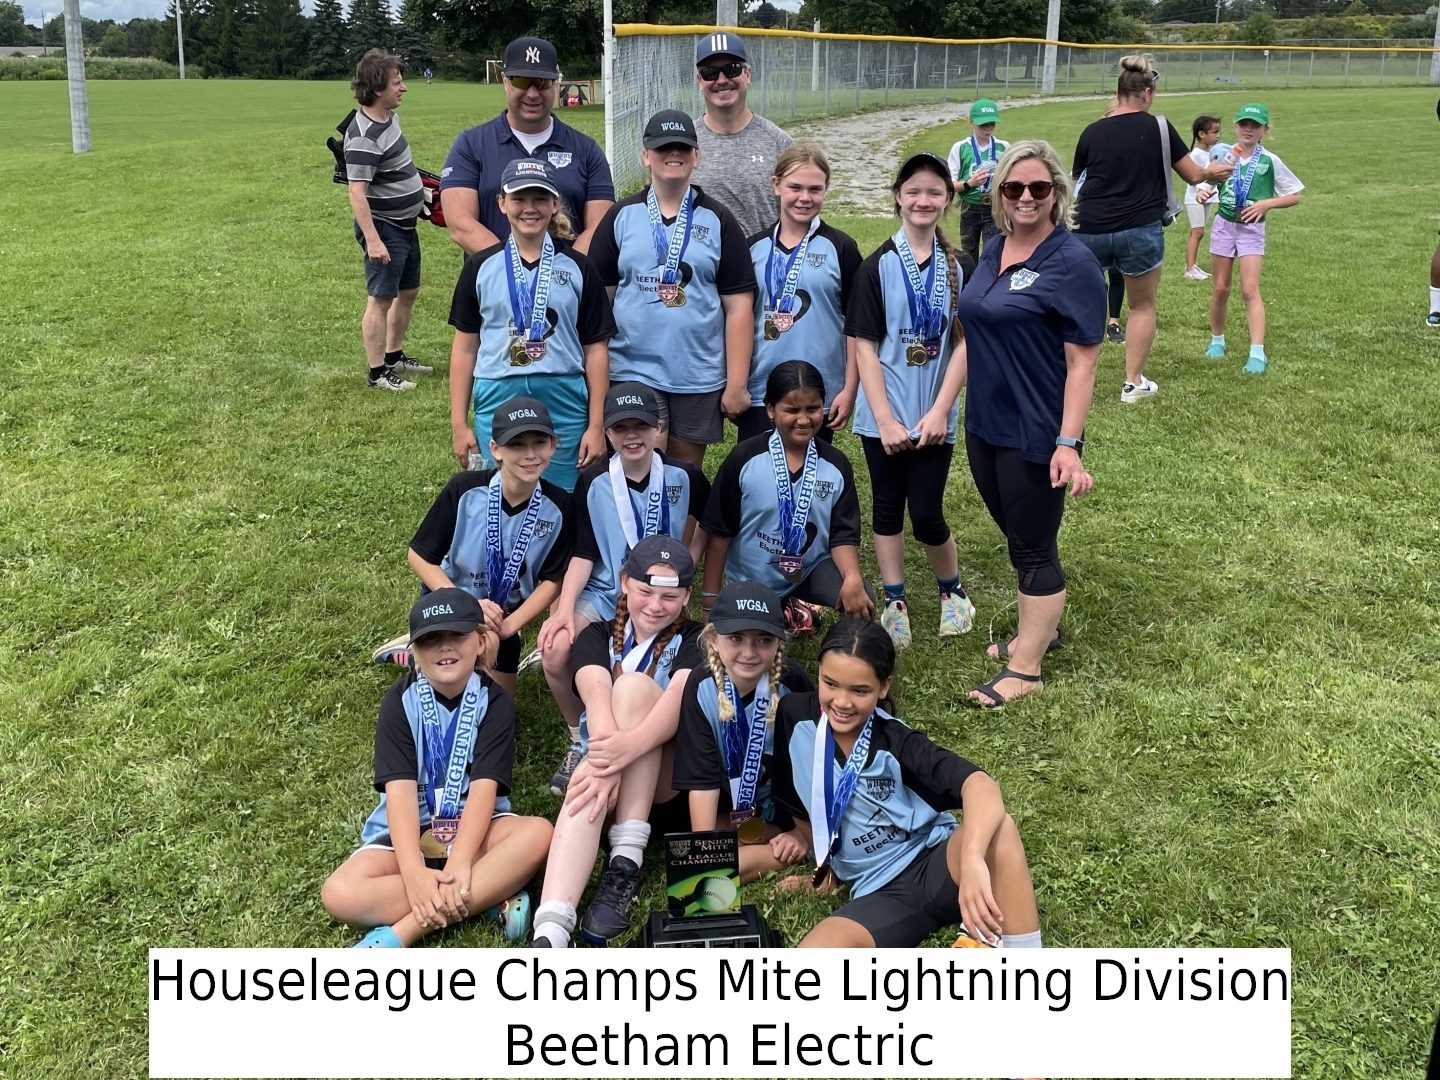 Mite Houseleague Champs Lightning Division